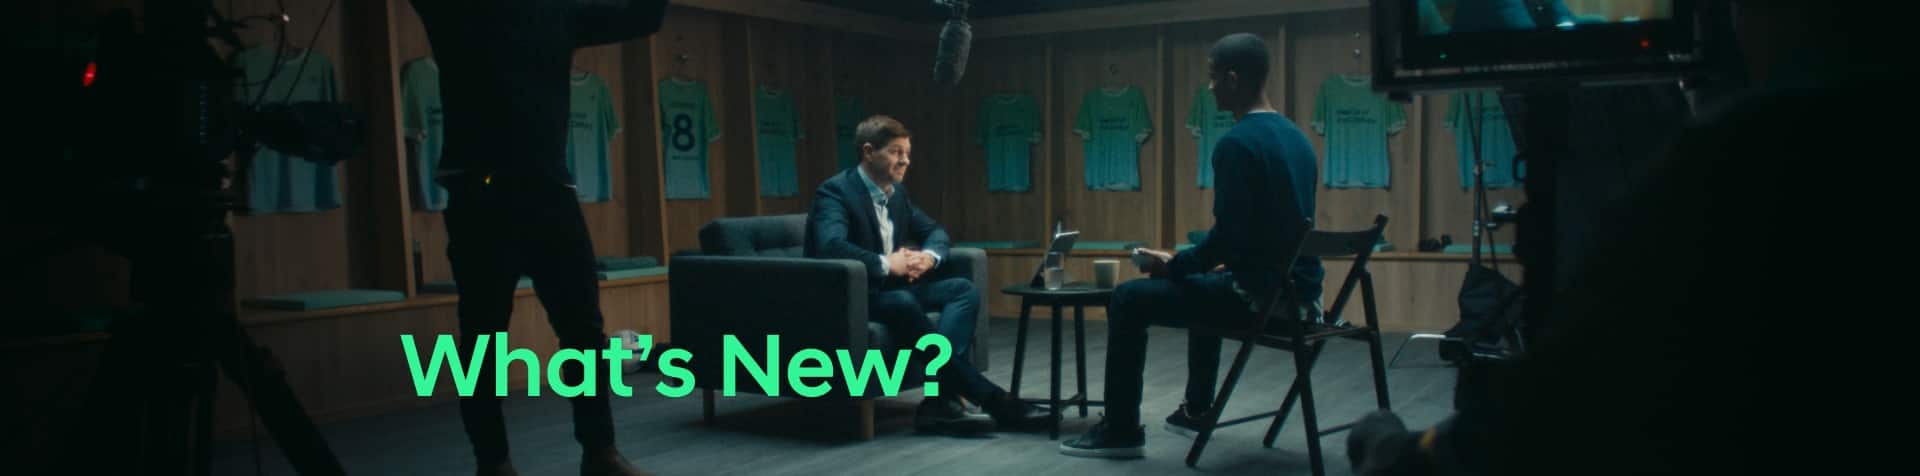 Steven Gerrard sitting in the changing room surrounded by Team Century jerseys, being interviewed. ‘What’s New?’ is written in green across the image.